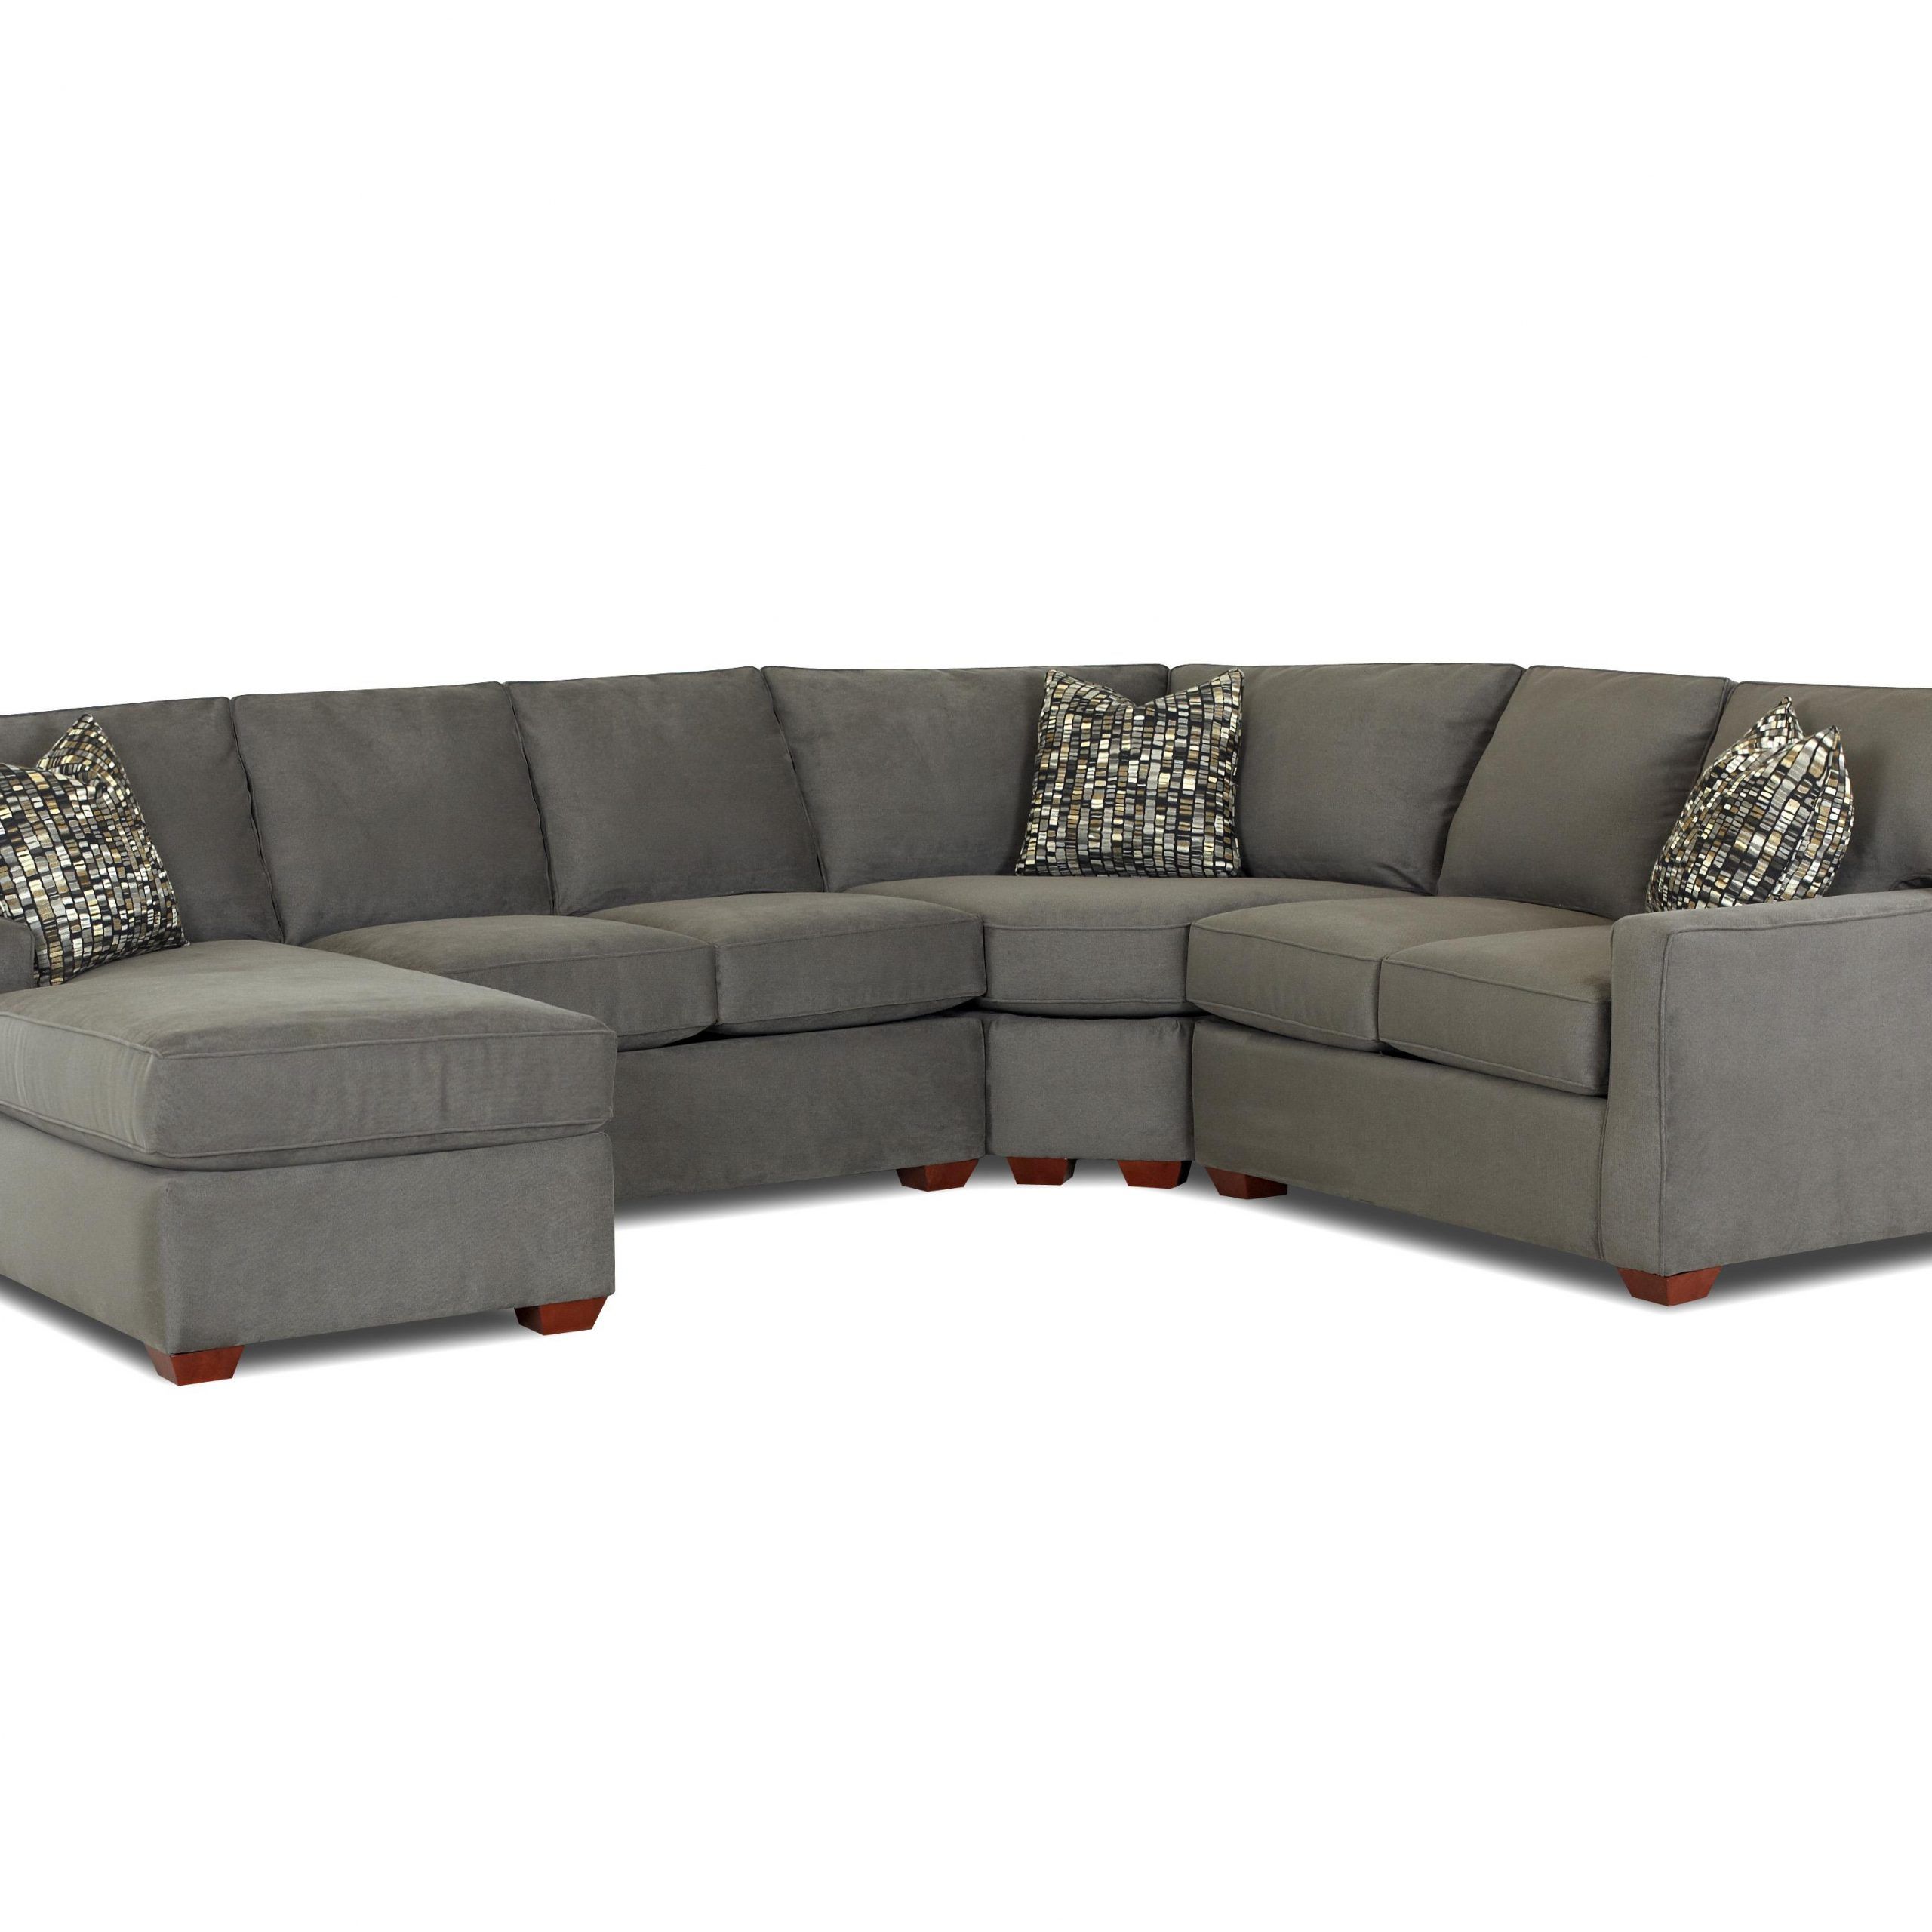 Contemporary L Shaped Sectional Sofa With Left Arm Facing With Regard To Hannah Left Sectional Sofas (View 15 of 15)